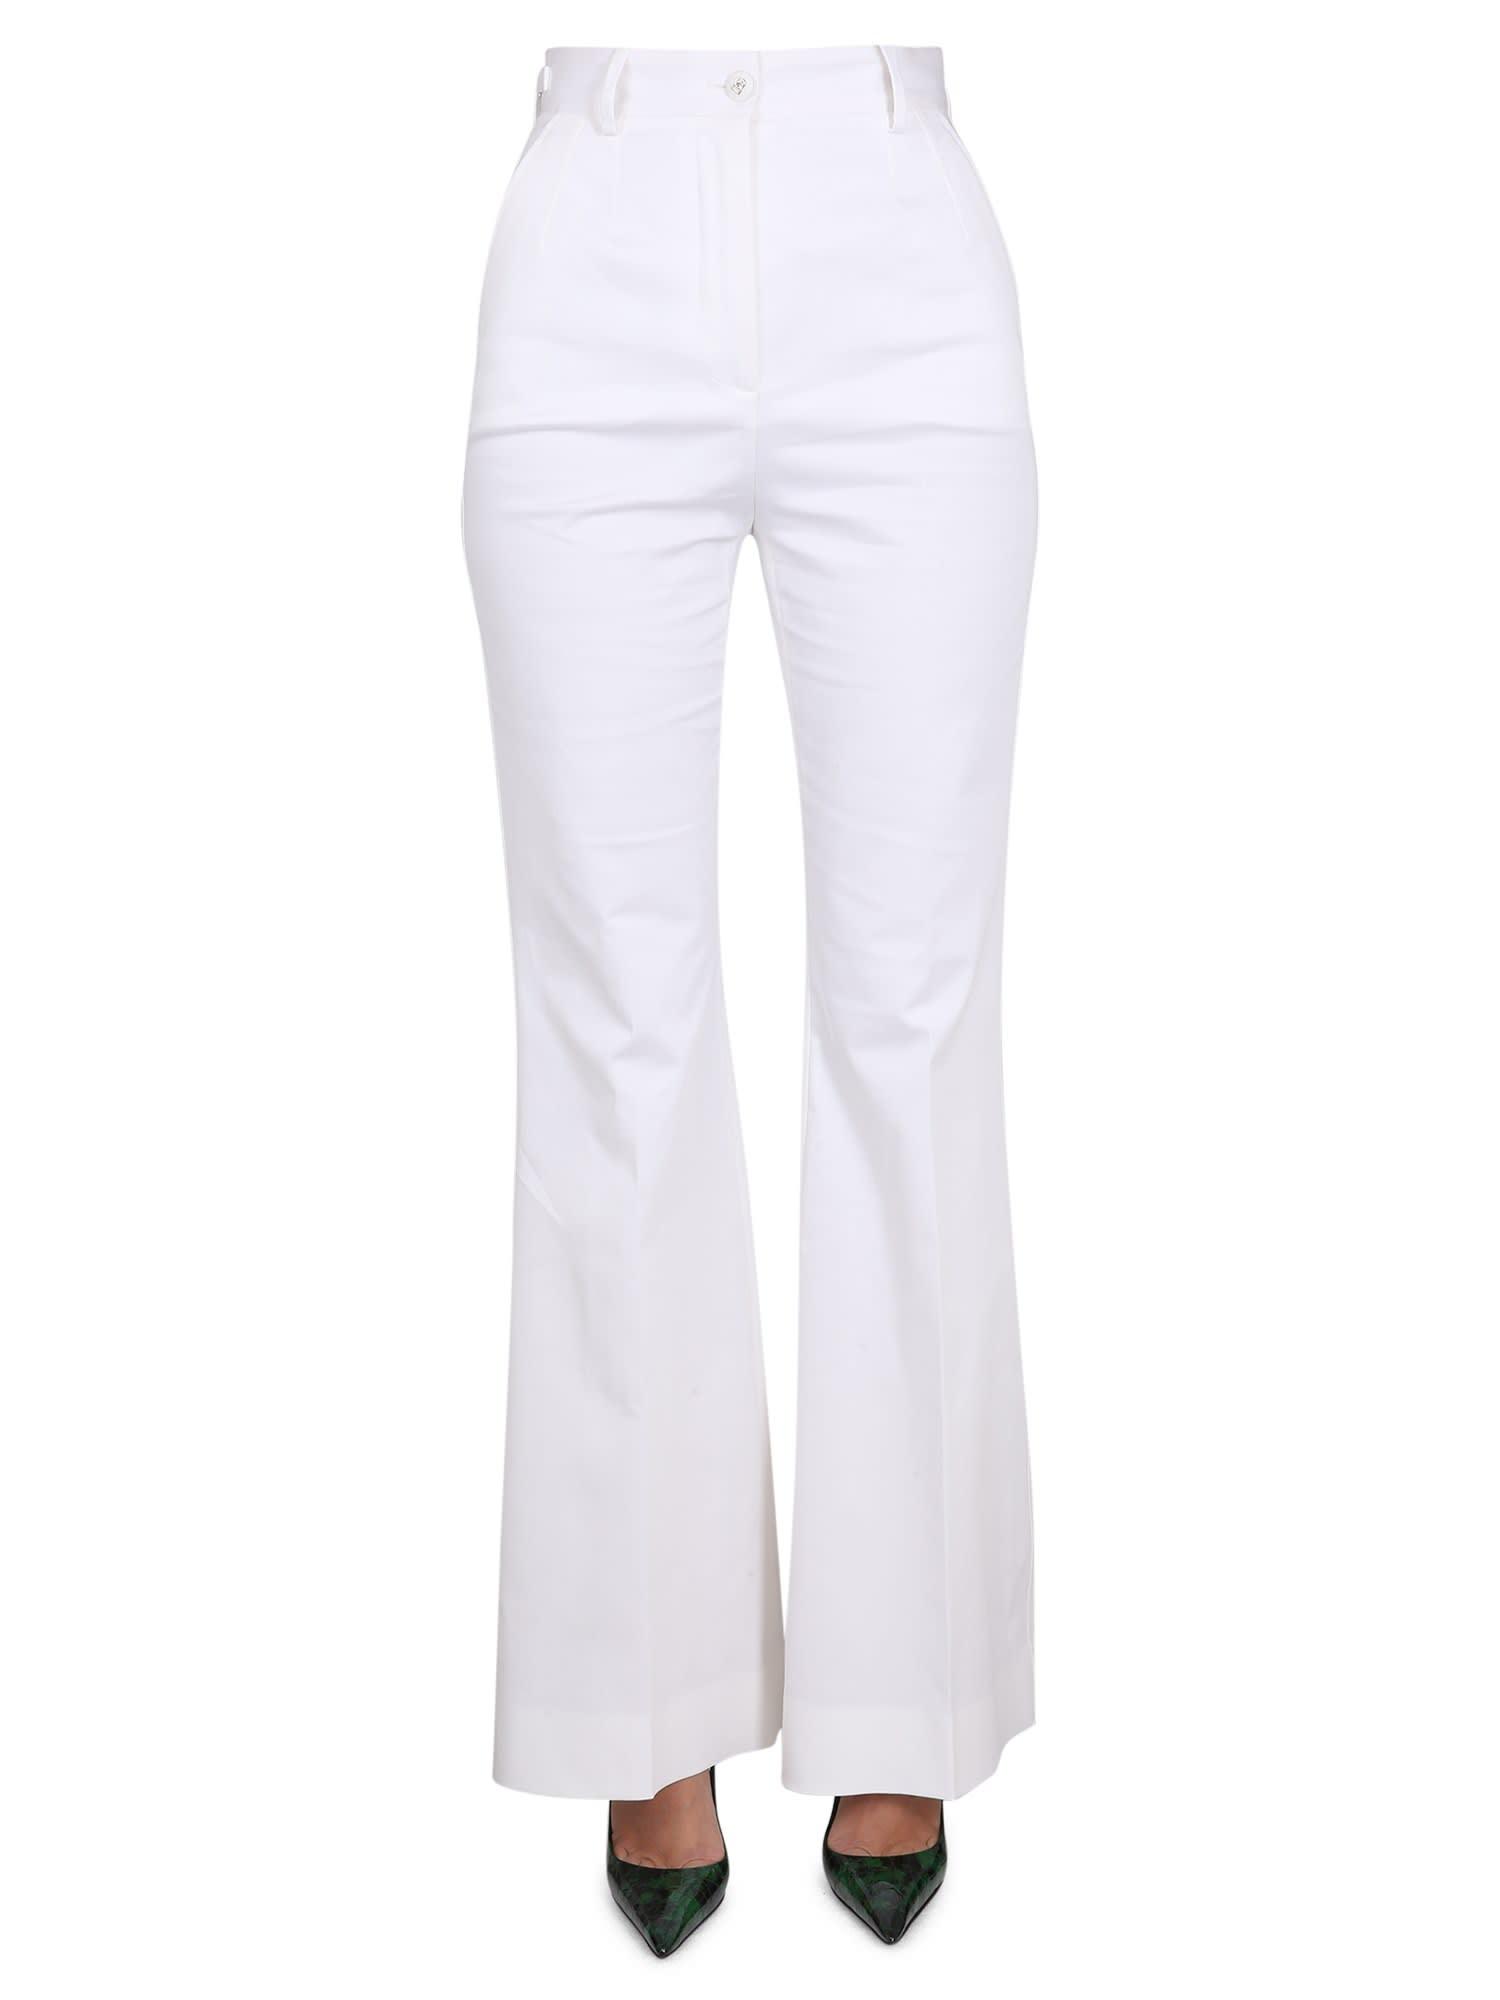 Dolce & Gabbana Flare Pant in White | Lyst